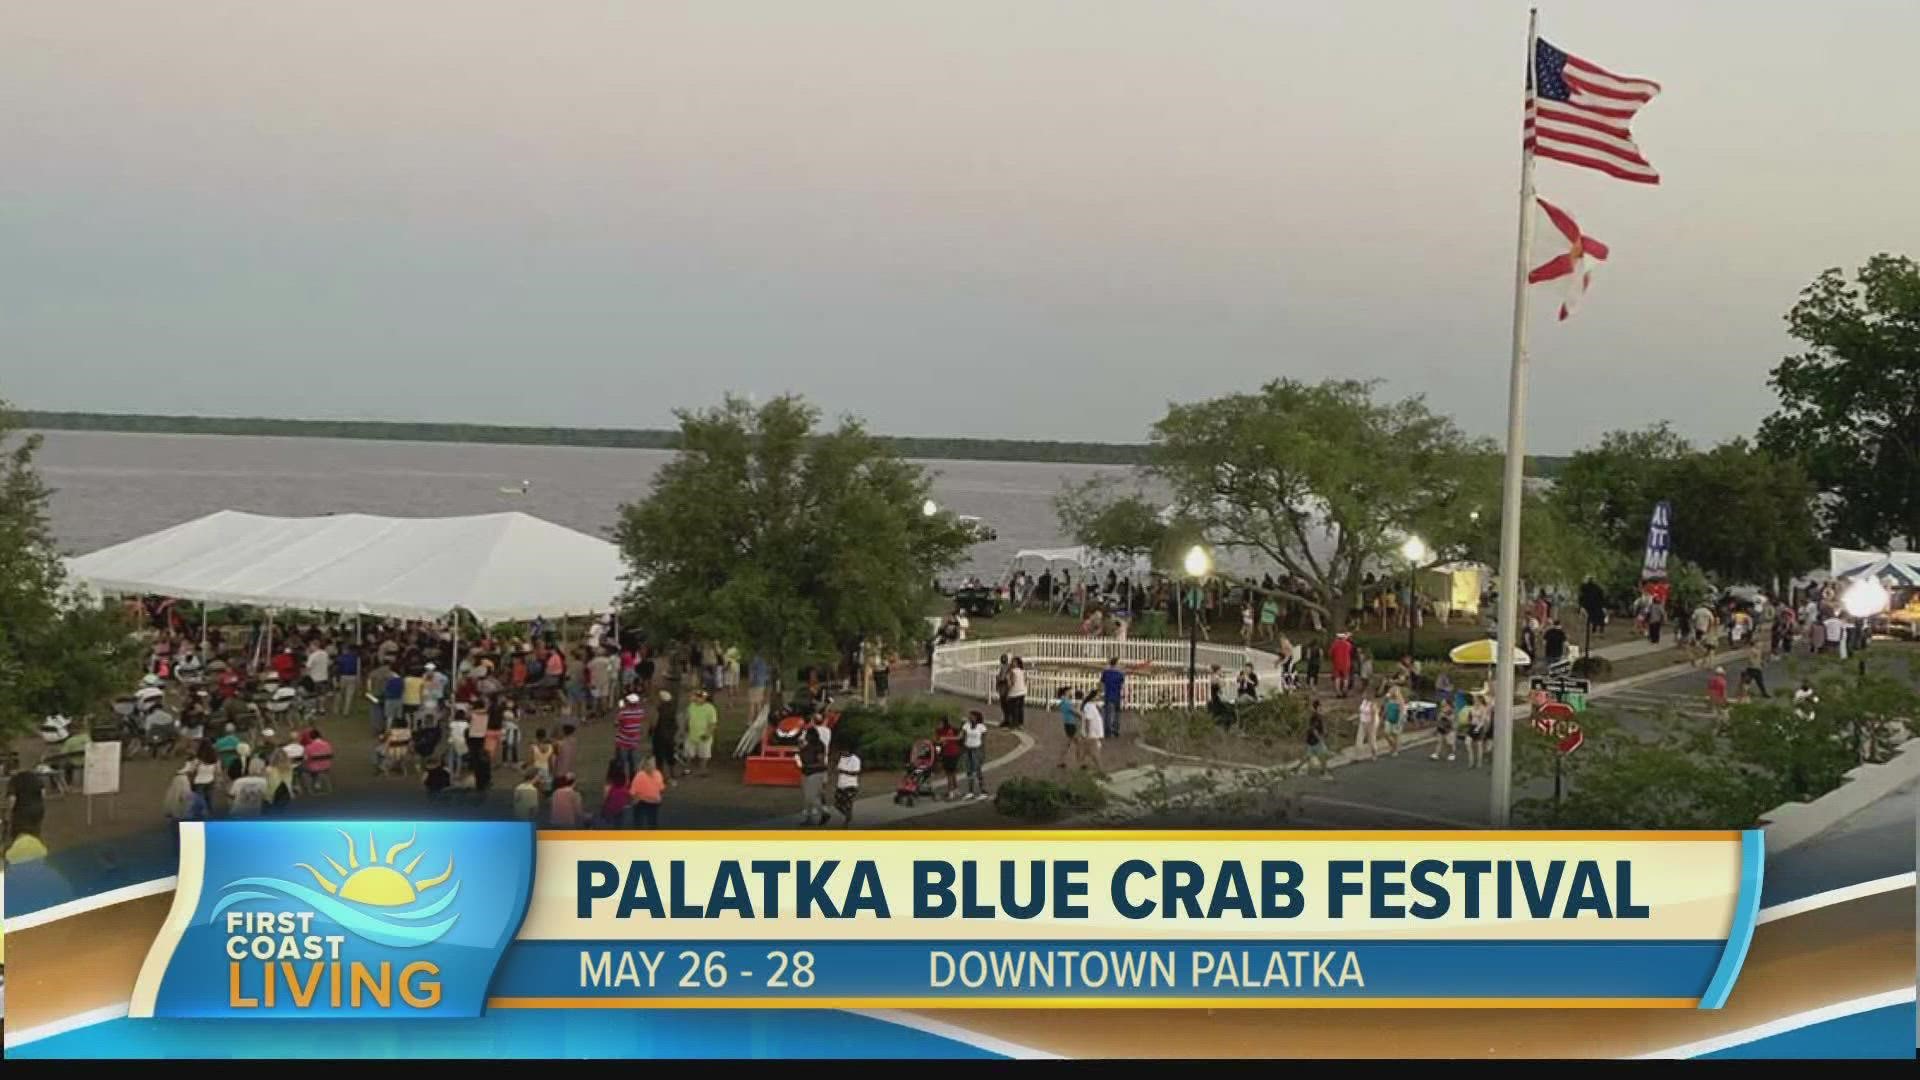 Details on this year's 'Palatka Blue Crab Festival' (FCL May 23, 2022